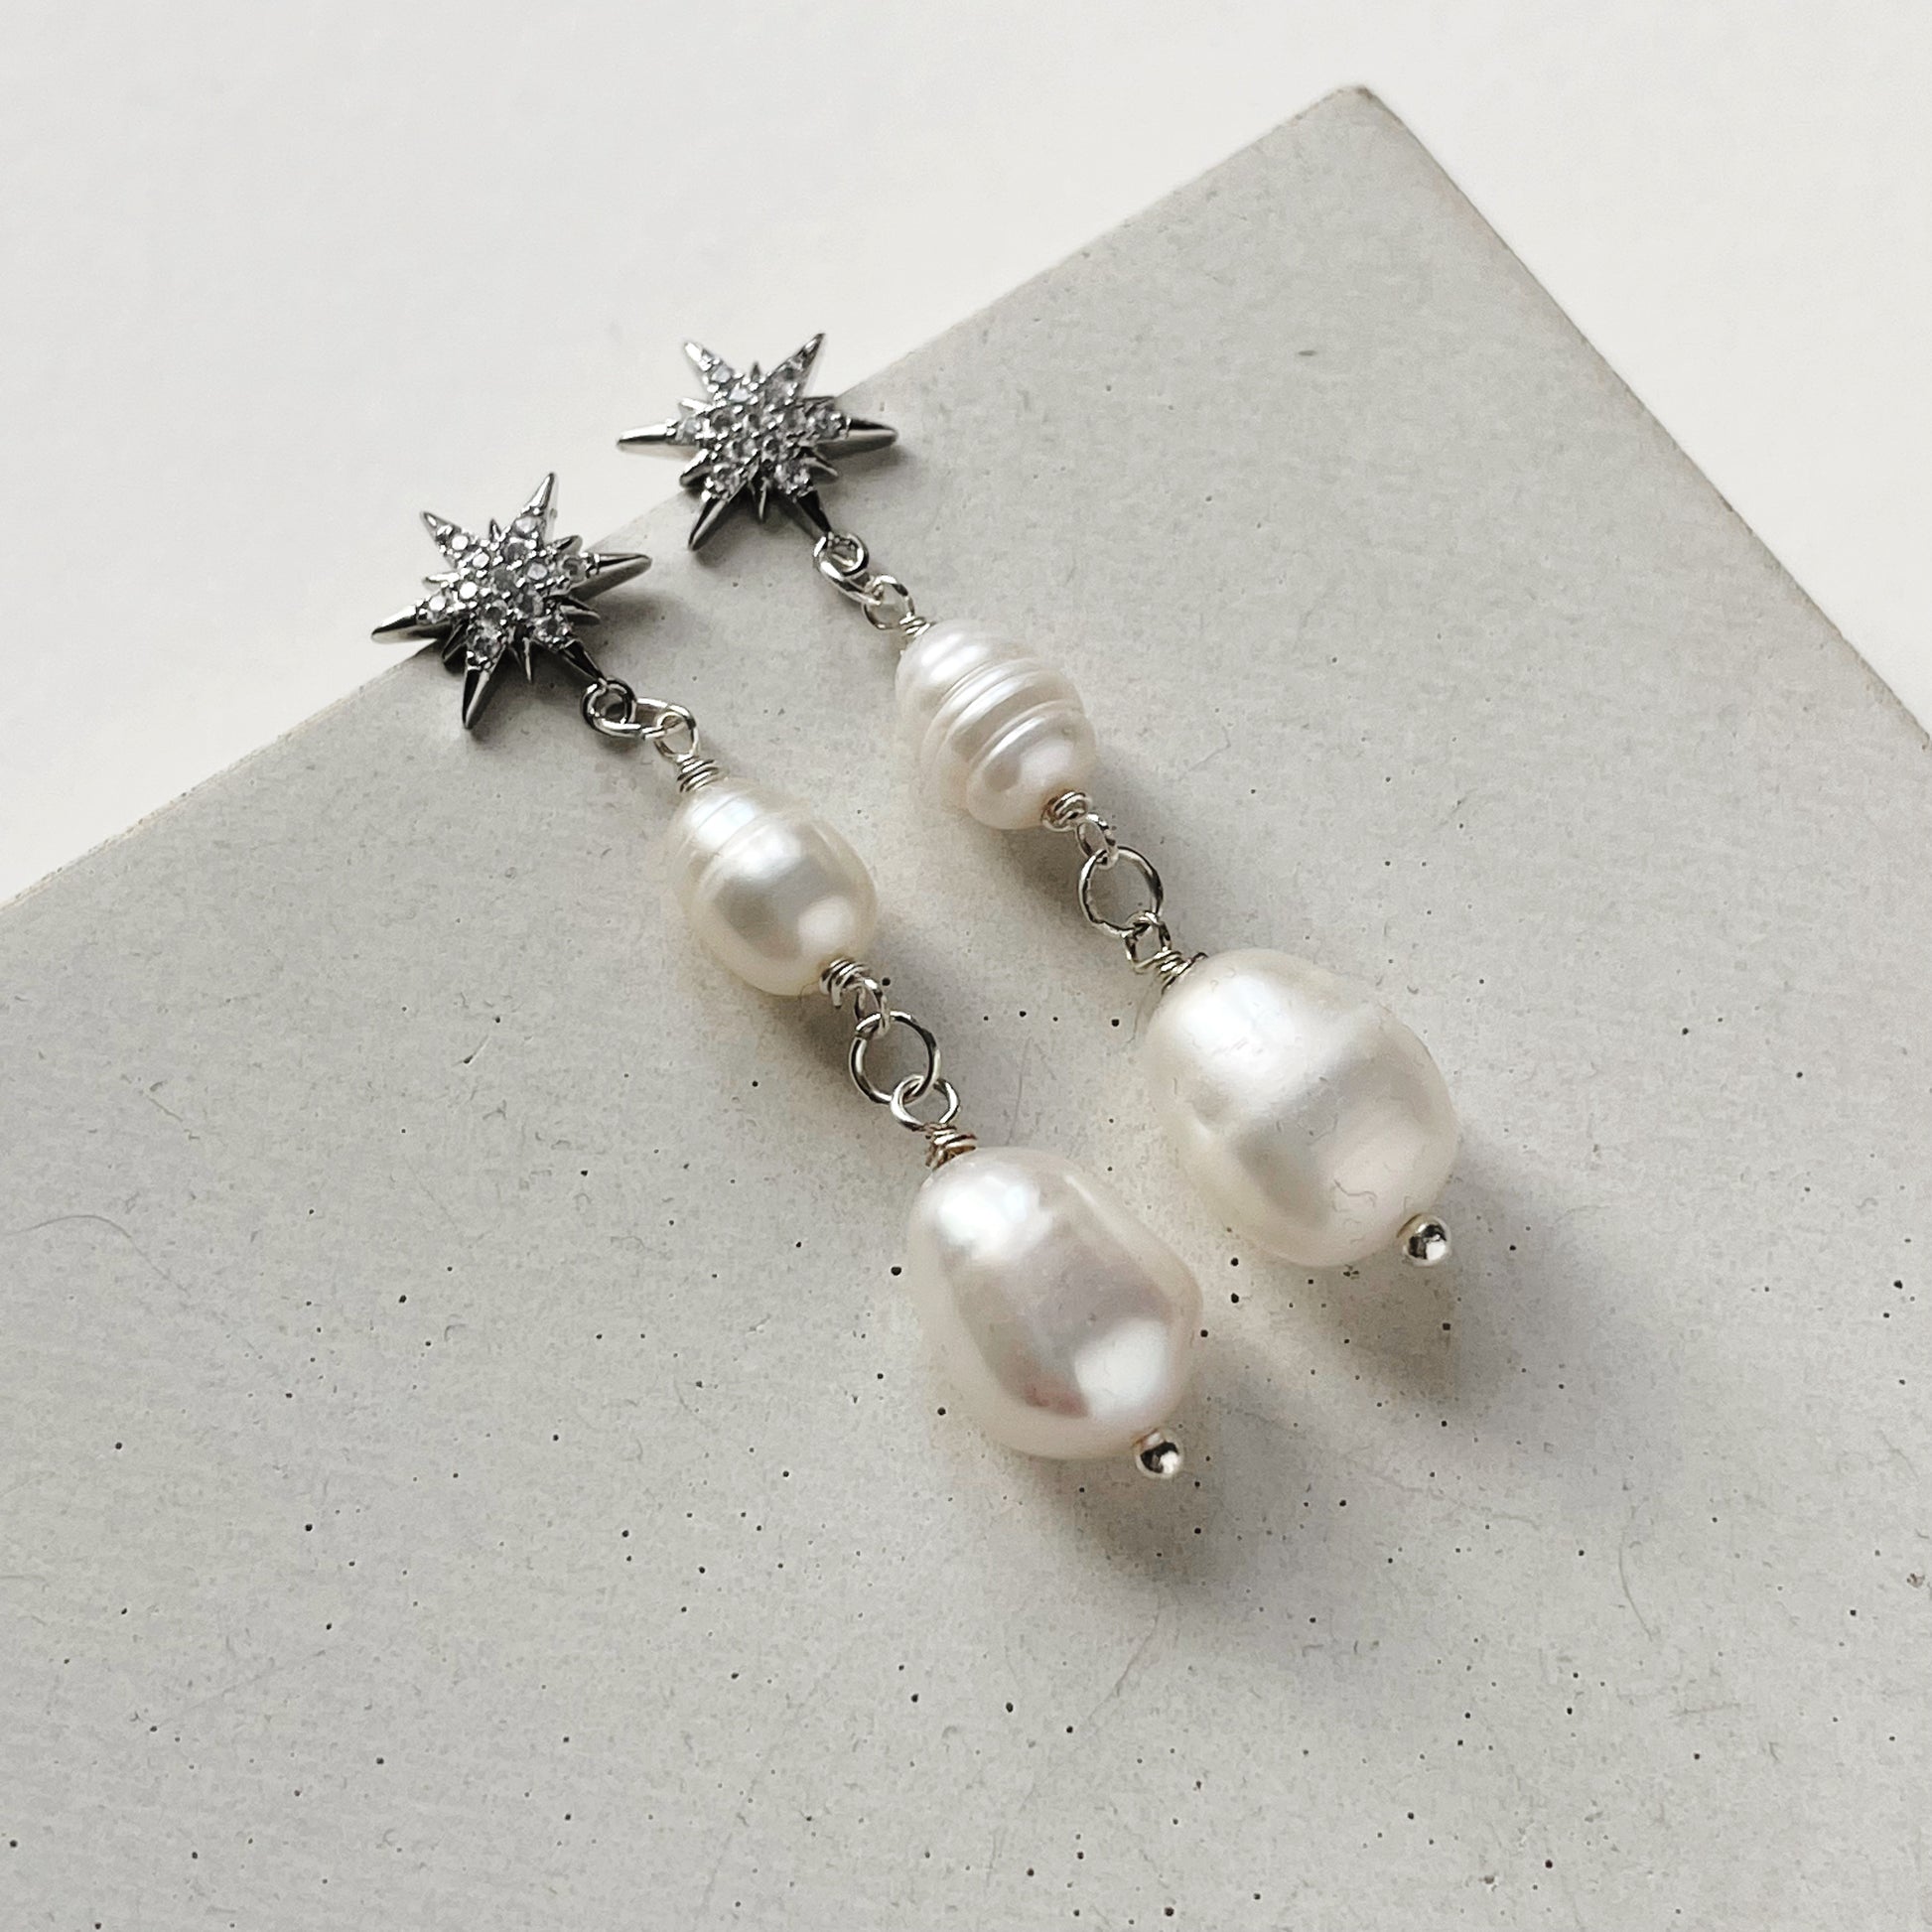 GYPSY MEDIUM | Statement Bridal Earrings of stars and pearls